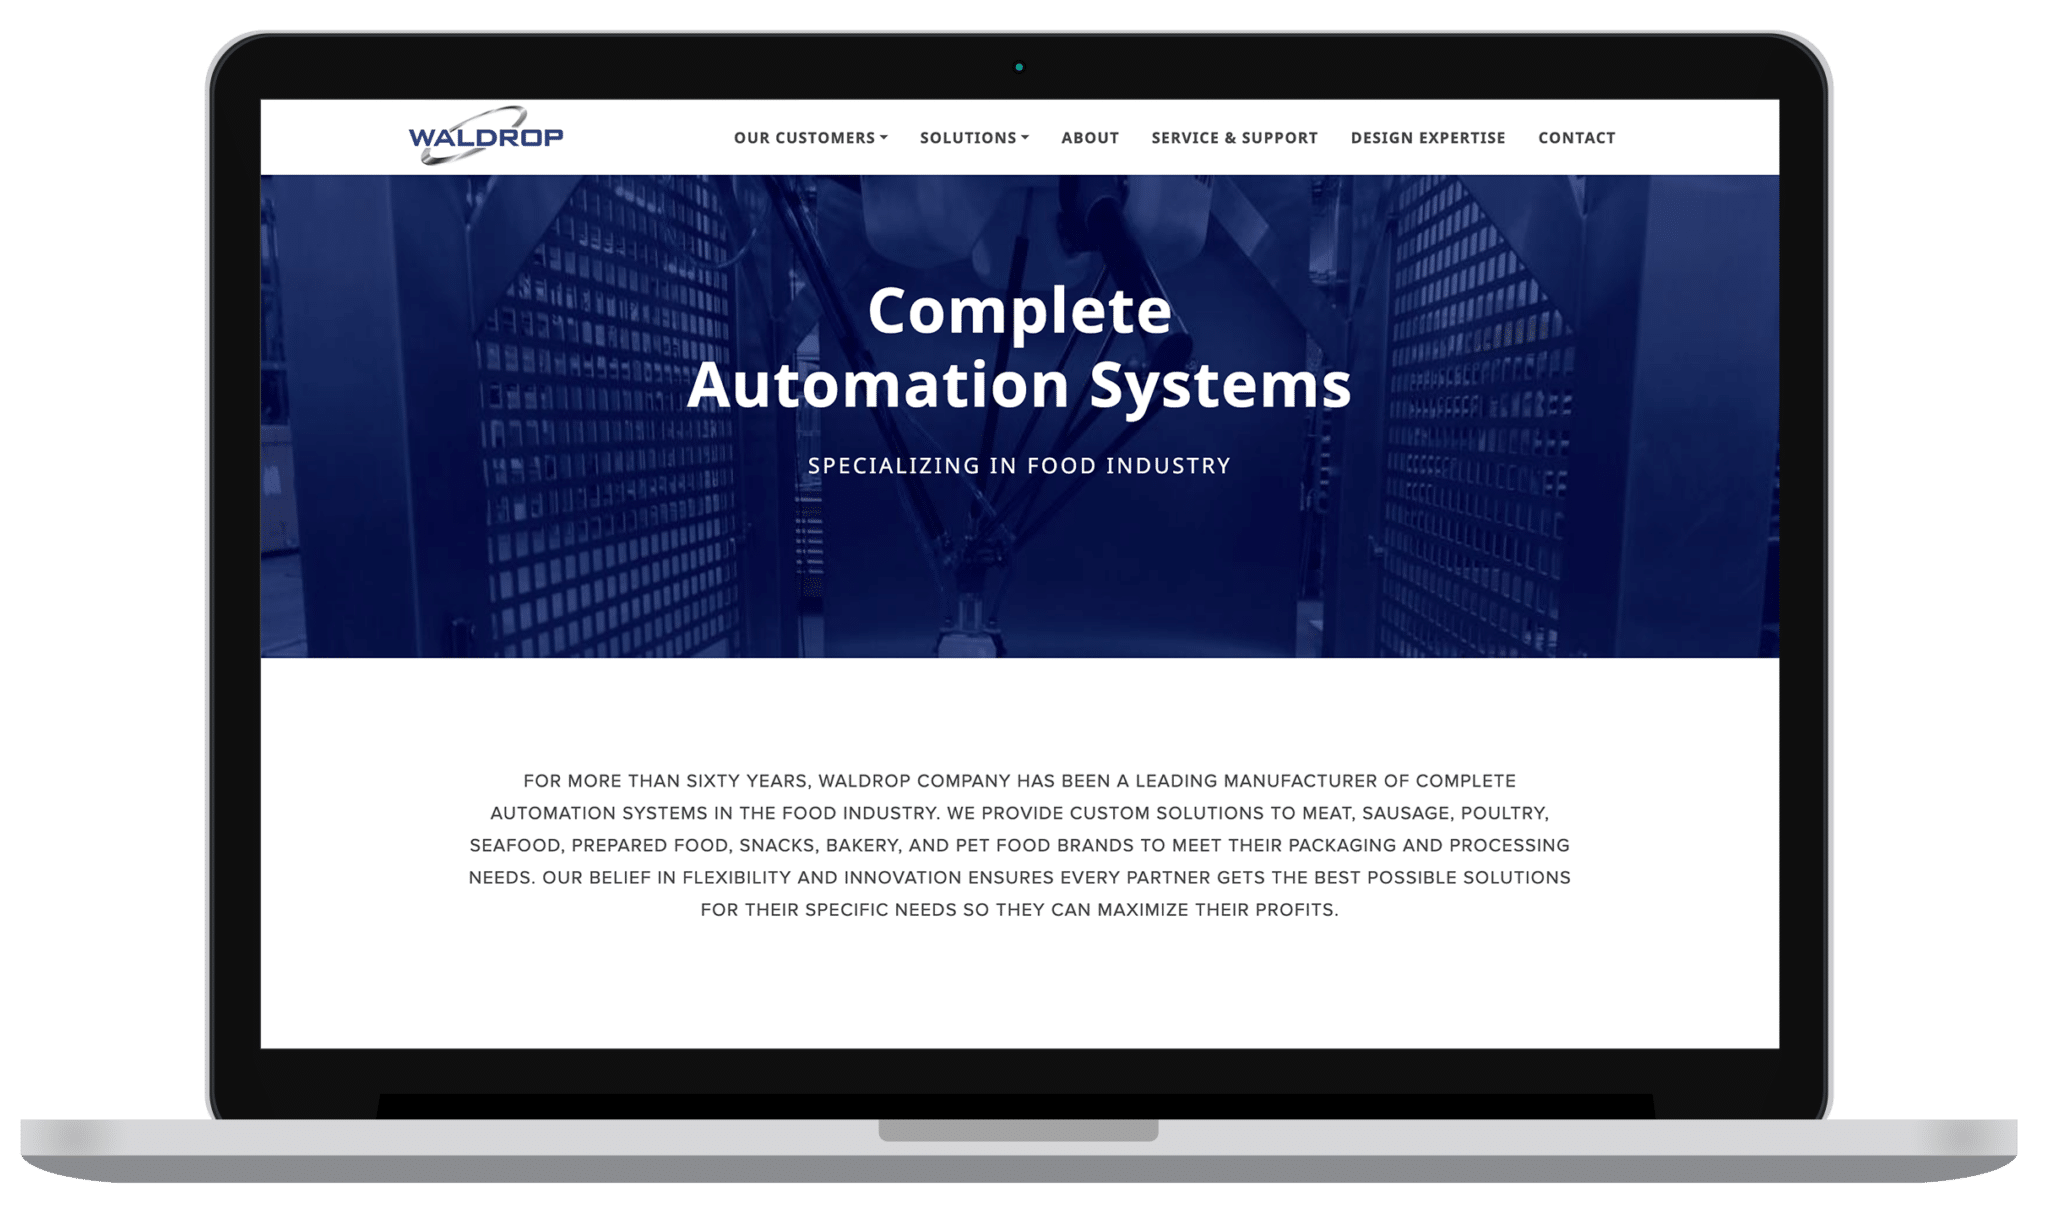 Waldrop Complete Automation Systems webpage view with content.